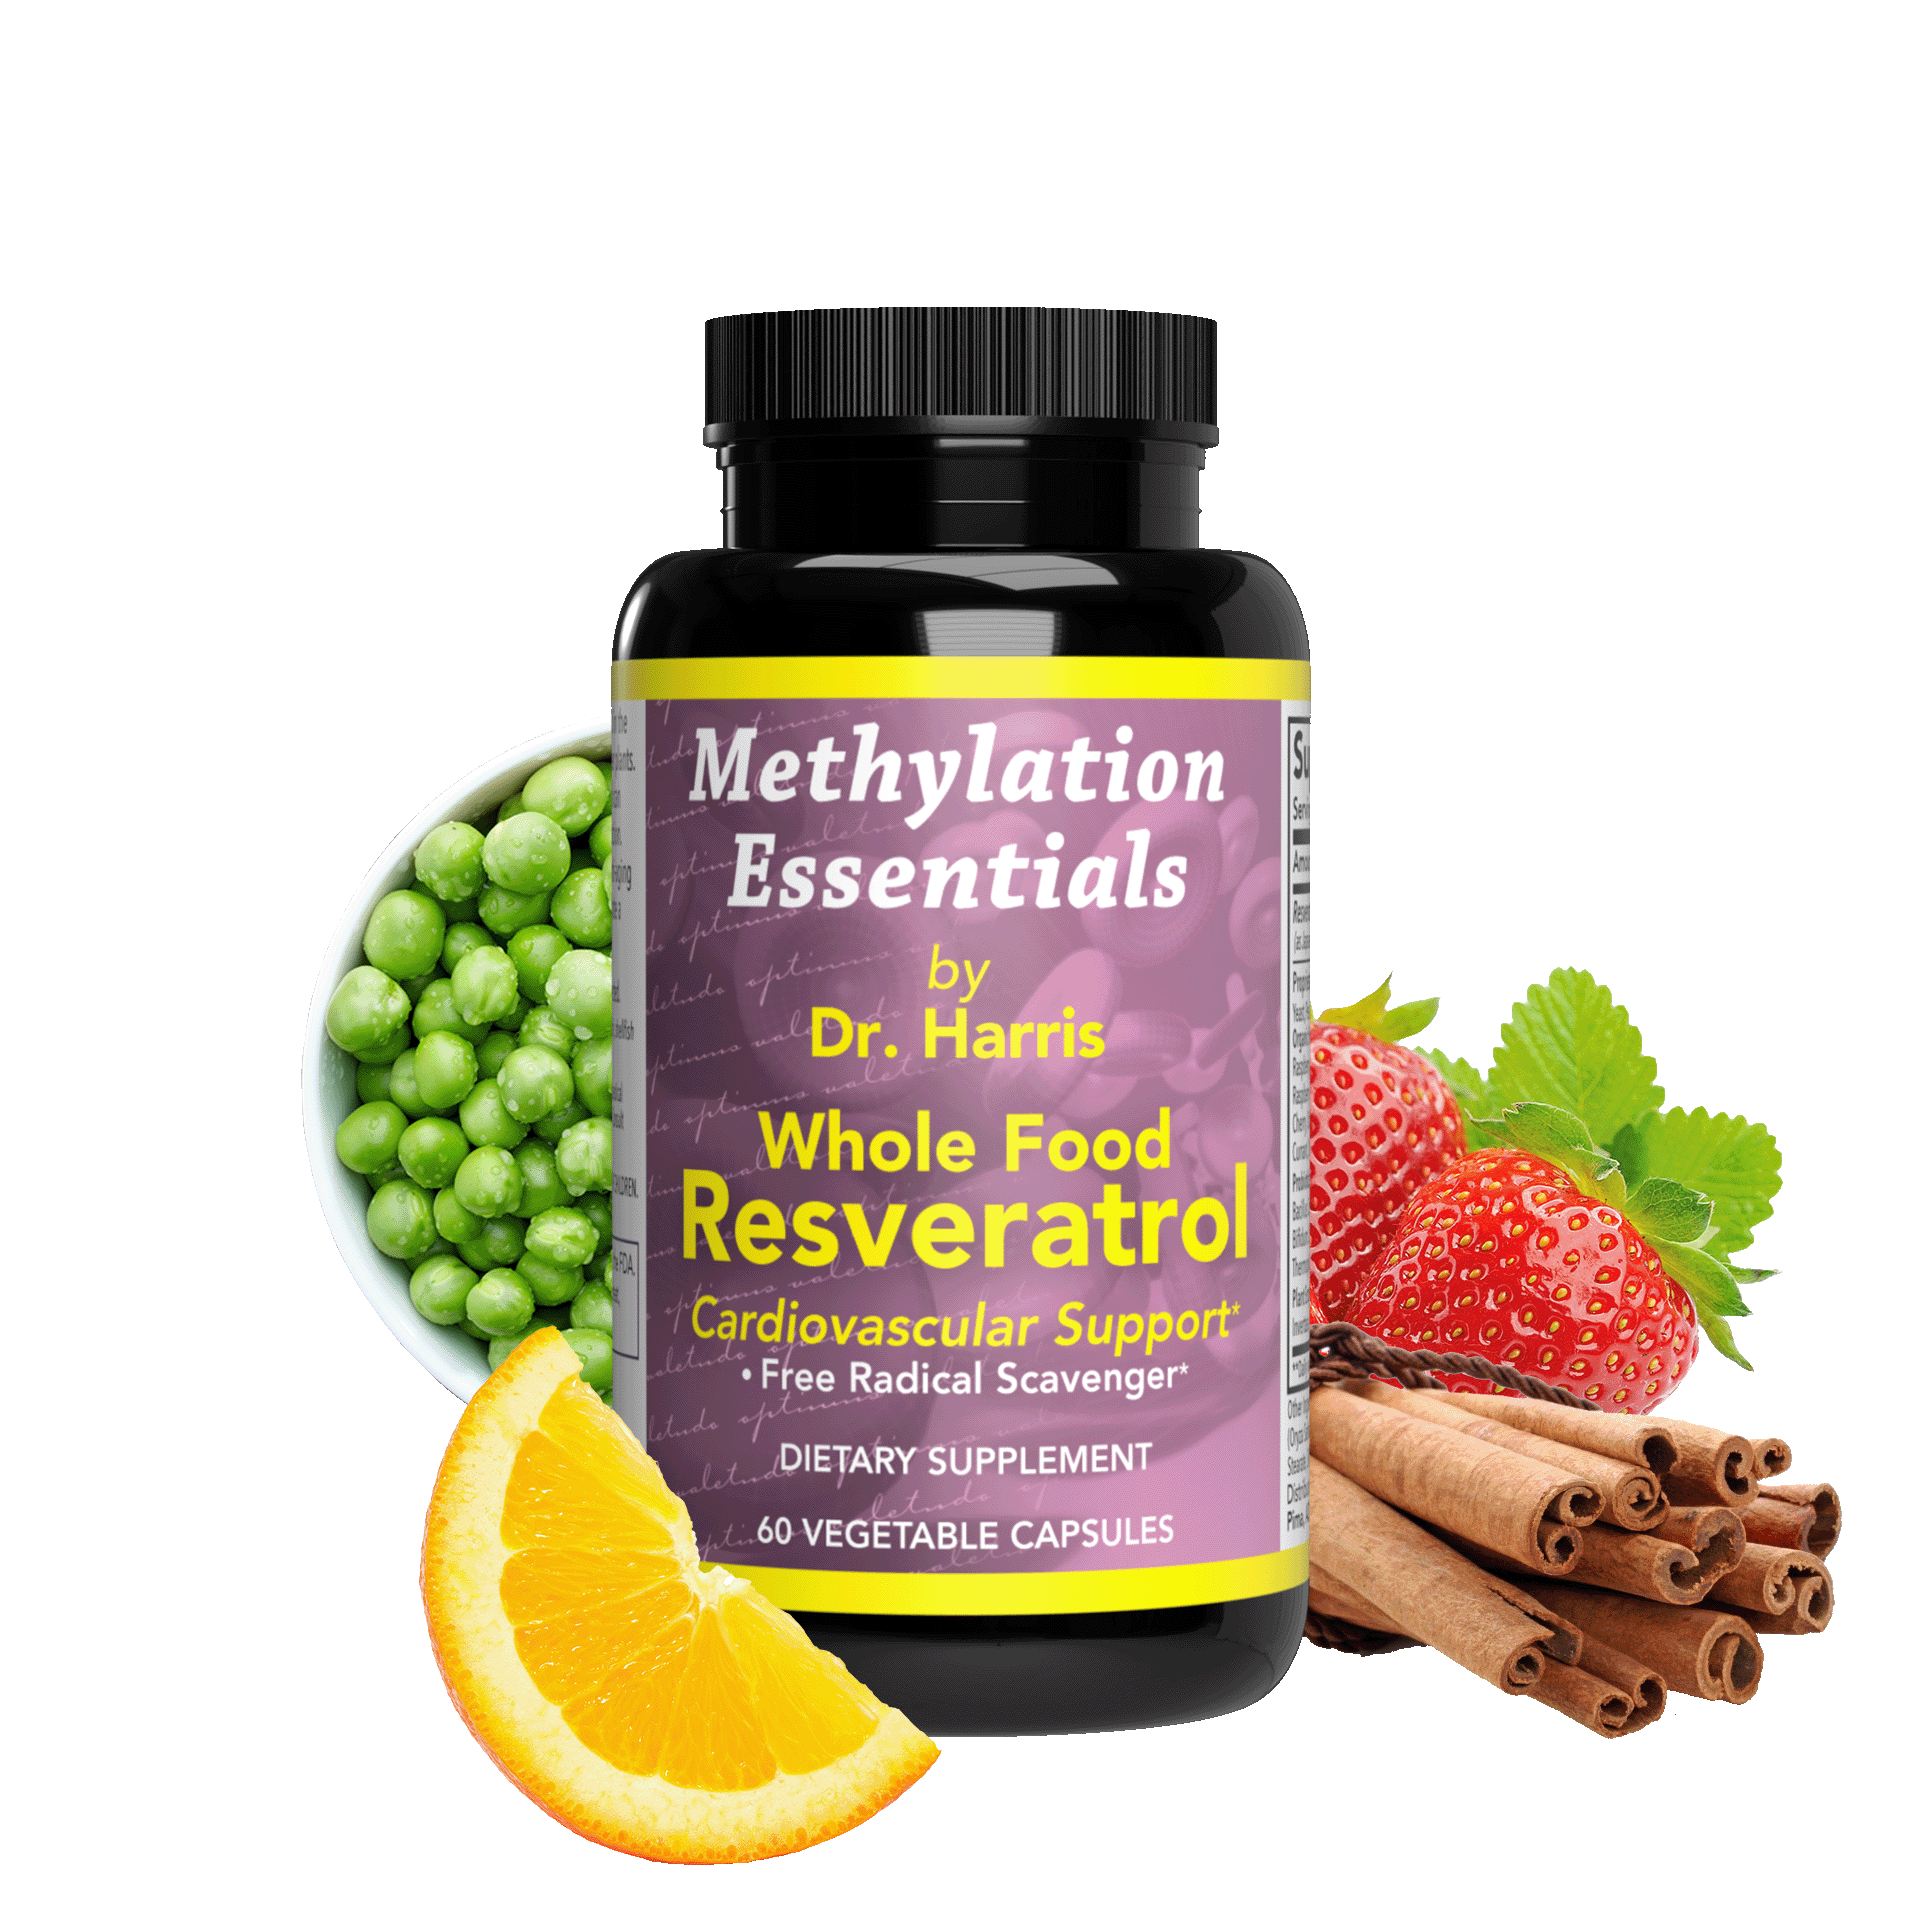 Image of a bottle of Essentials Resveratrol. Around the bottle are strawberries, peas, cinnamon sticks, and a lemon slice.